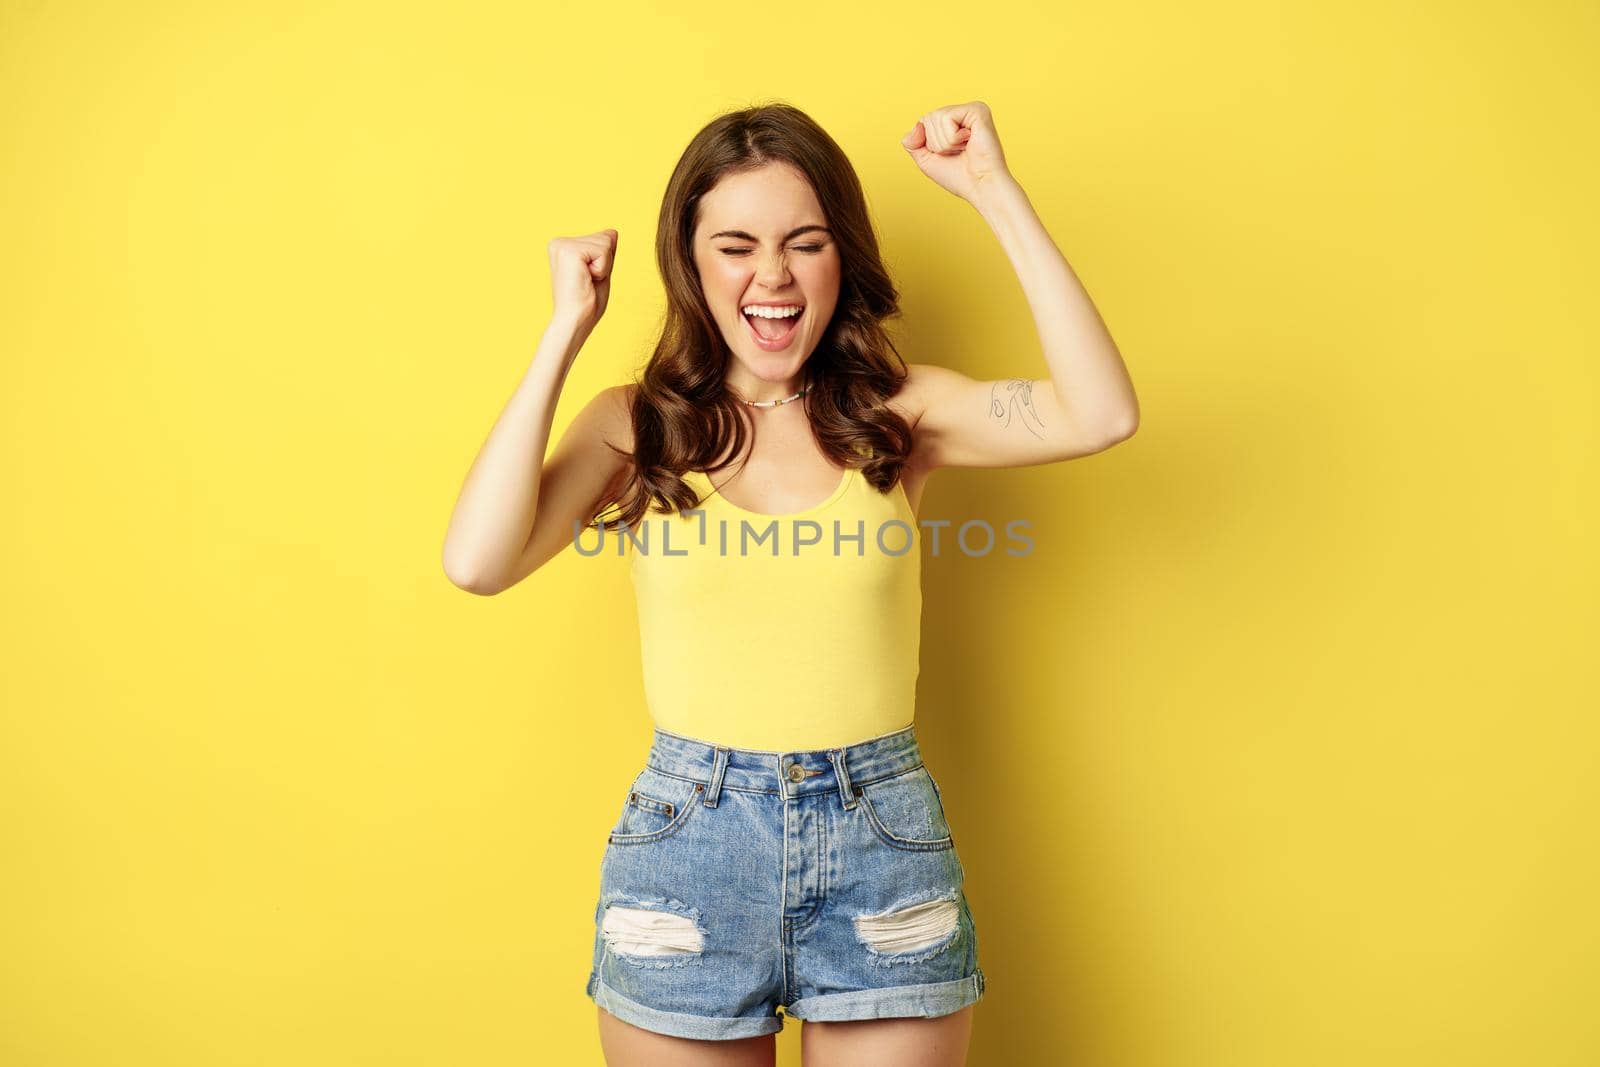 Enthusiastic young woman shouting and cheering, rejoicing, raising hands up and screaming in joy, chanting, standing over yellow background.